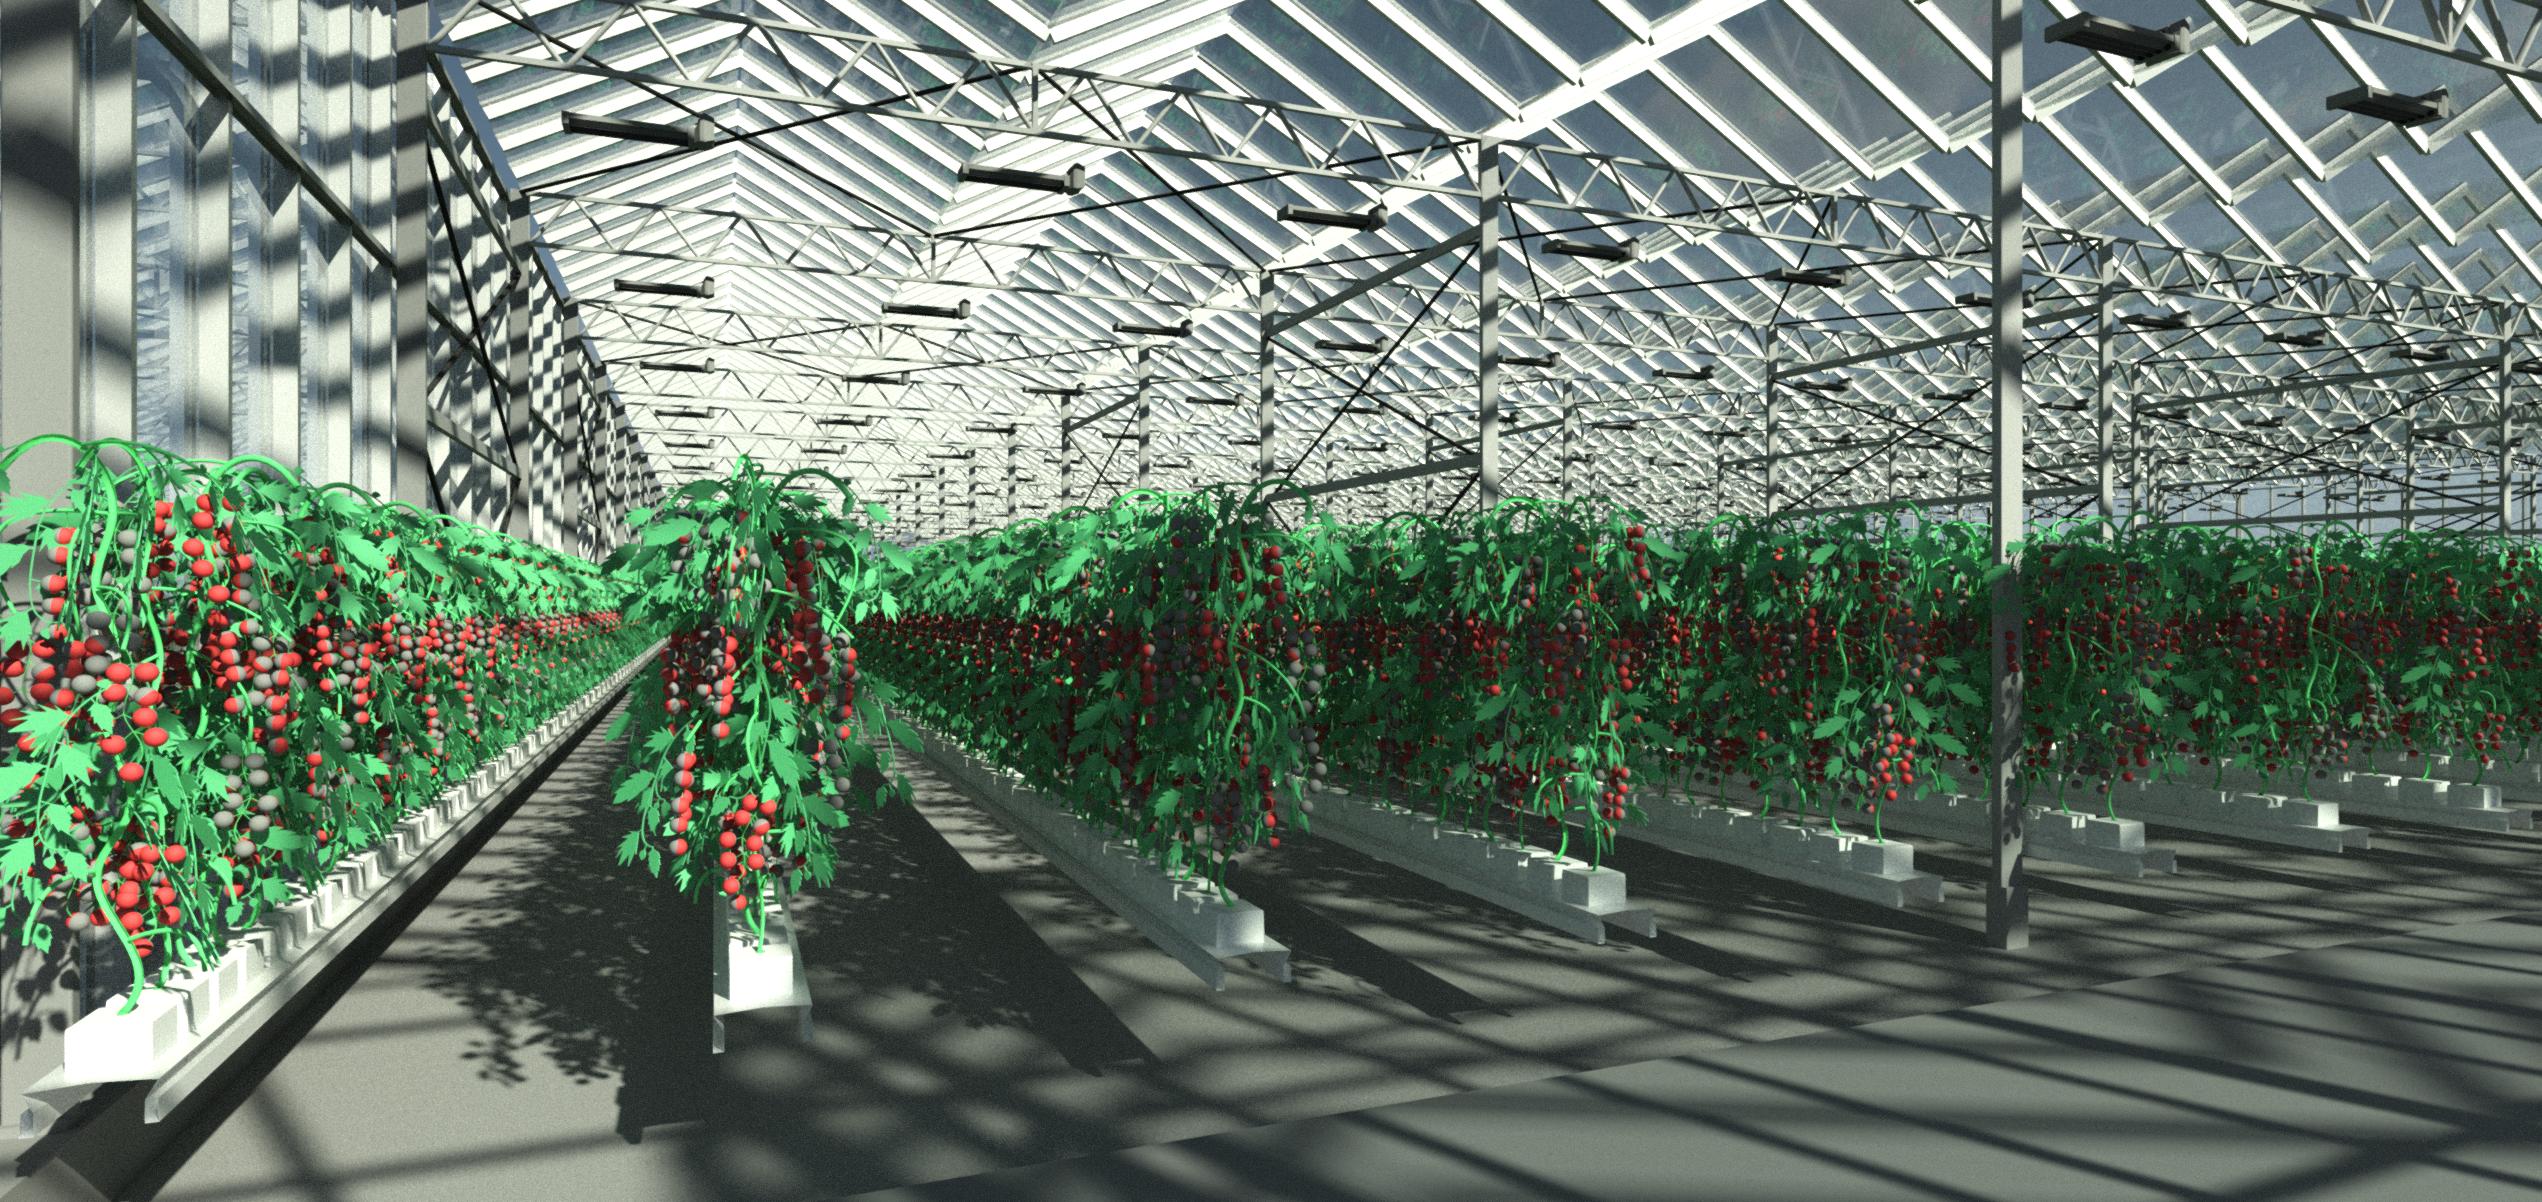 greenhouse with tomatoes